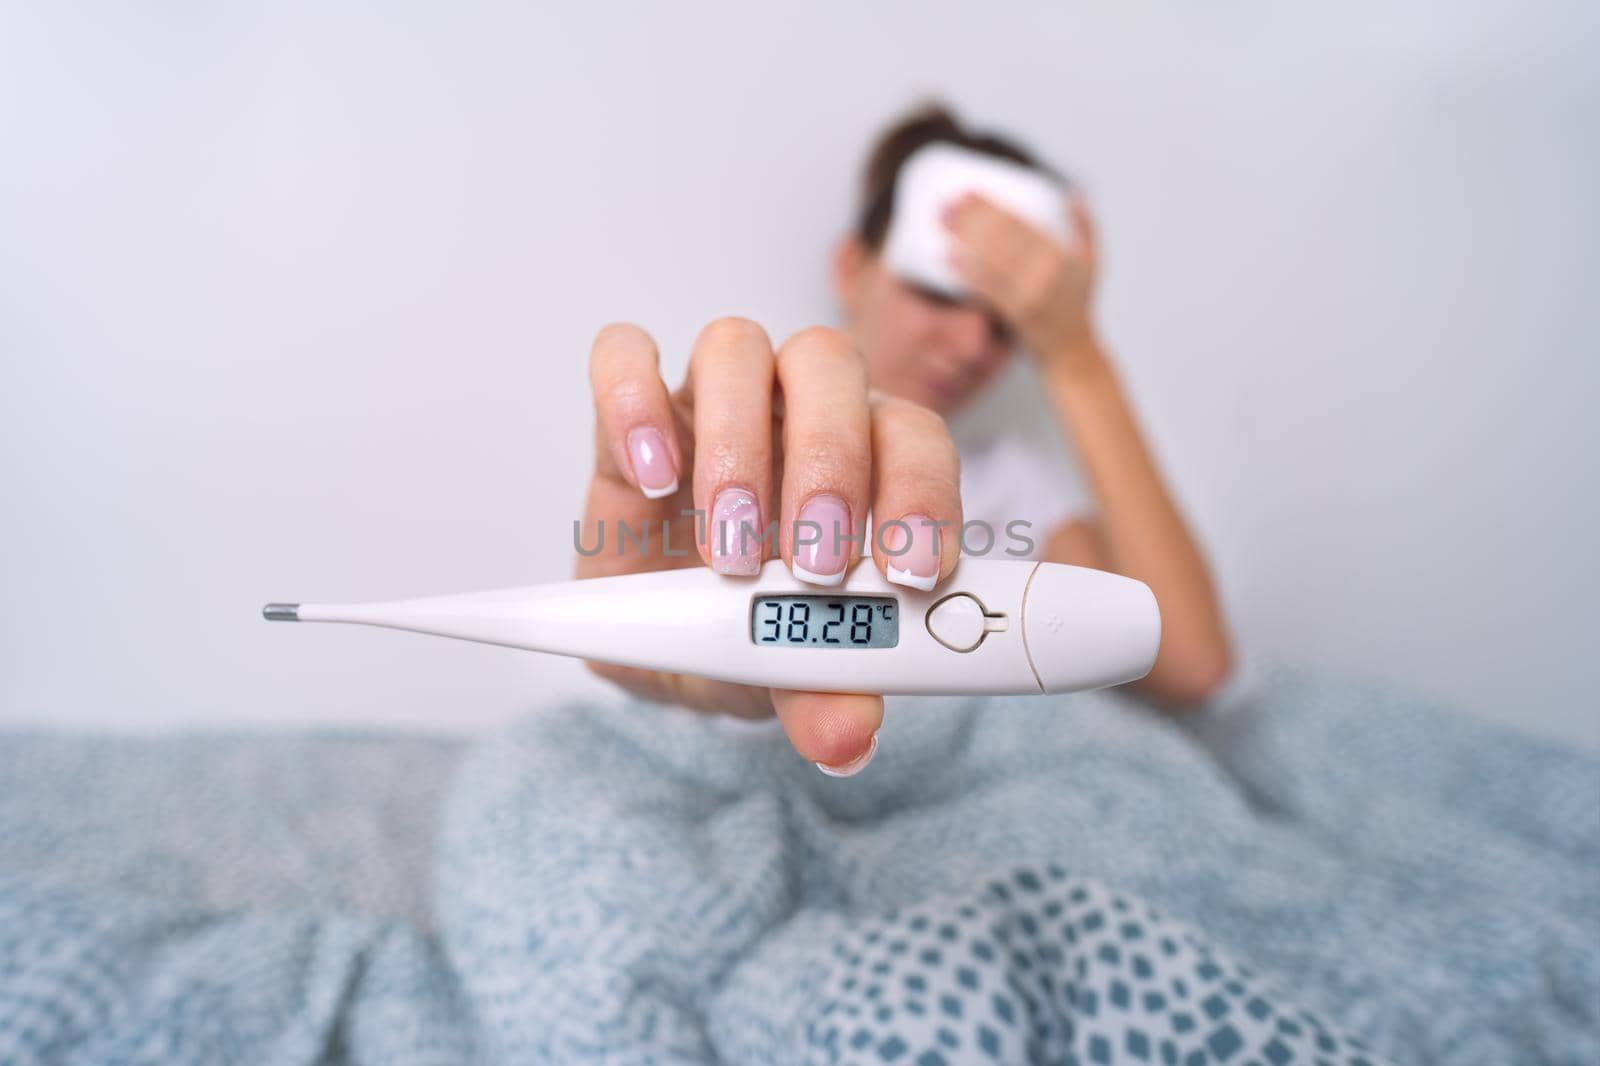 Sick woman with a high fever showing medical thermometer with temperature 38,2. Woman measuring body temperature by DariaKulkova